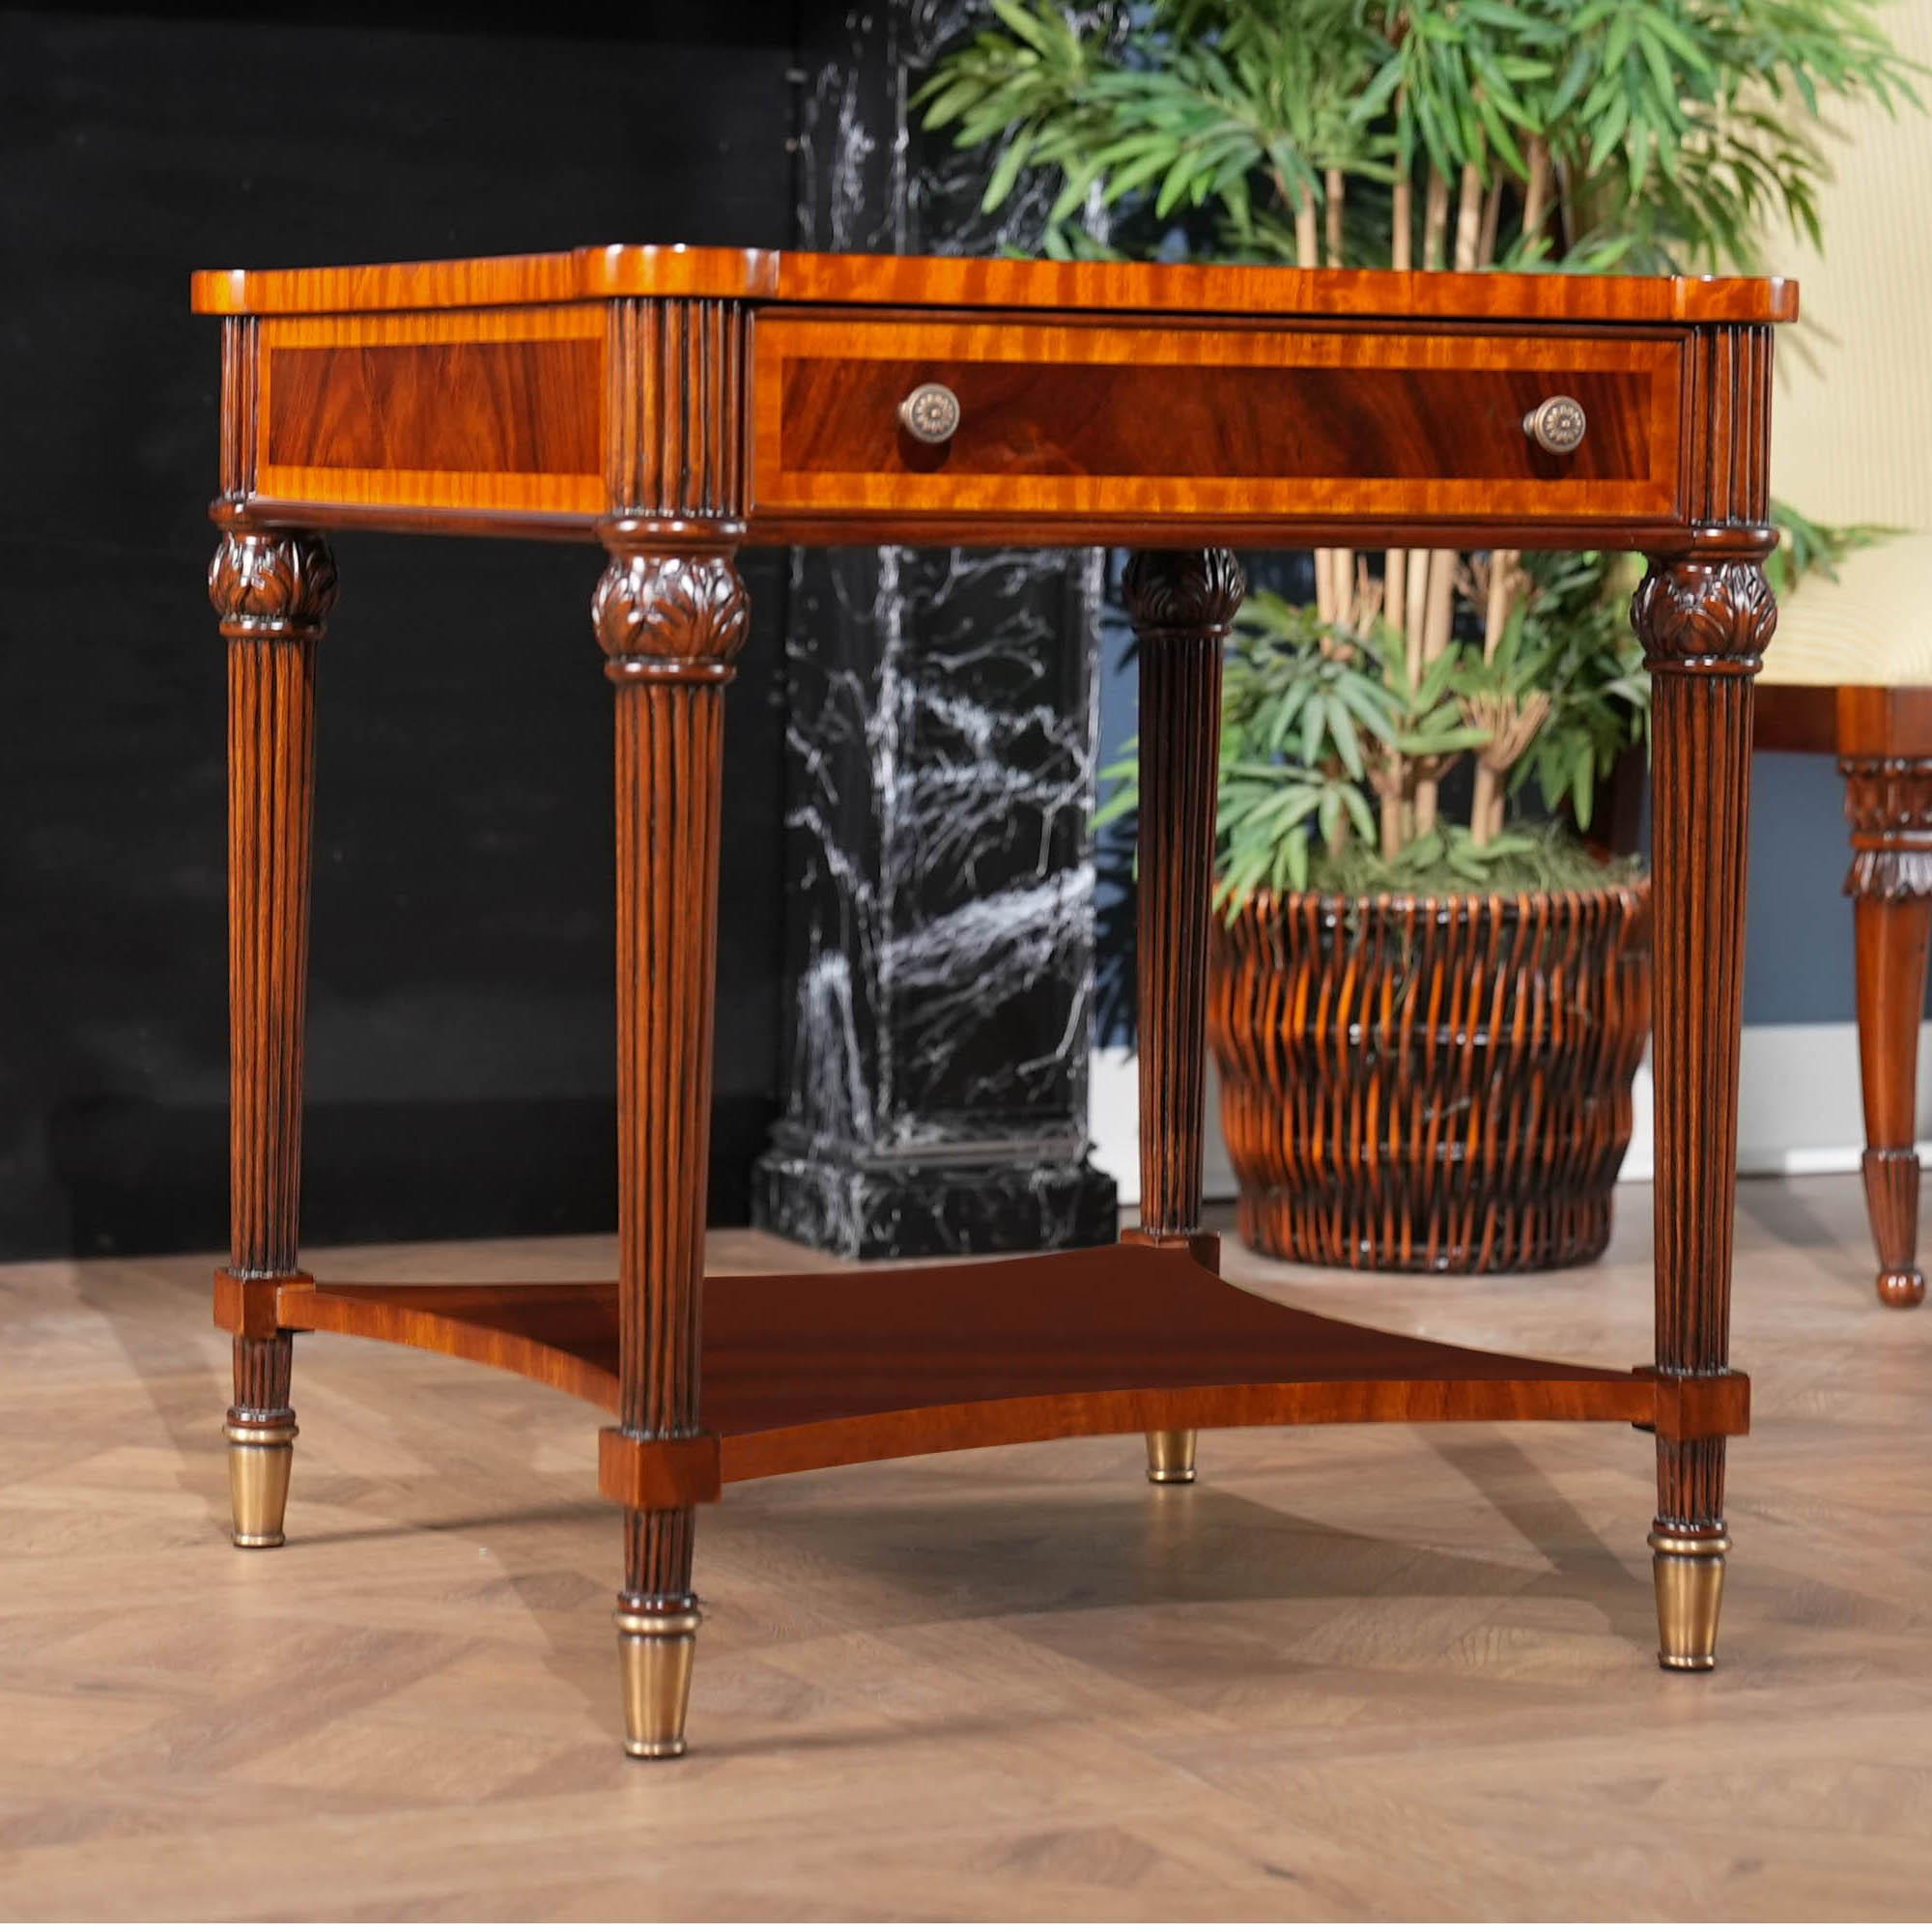 A Square Mahogany End Table from Niagara Furniture with all of the bells and whistles including one drawer, reeded legs, solid brass capped feet and cookie shaped, rounded corners. Great quality construction and attention to detail make this a